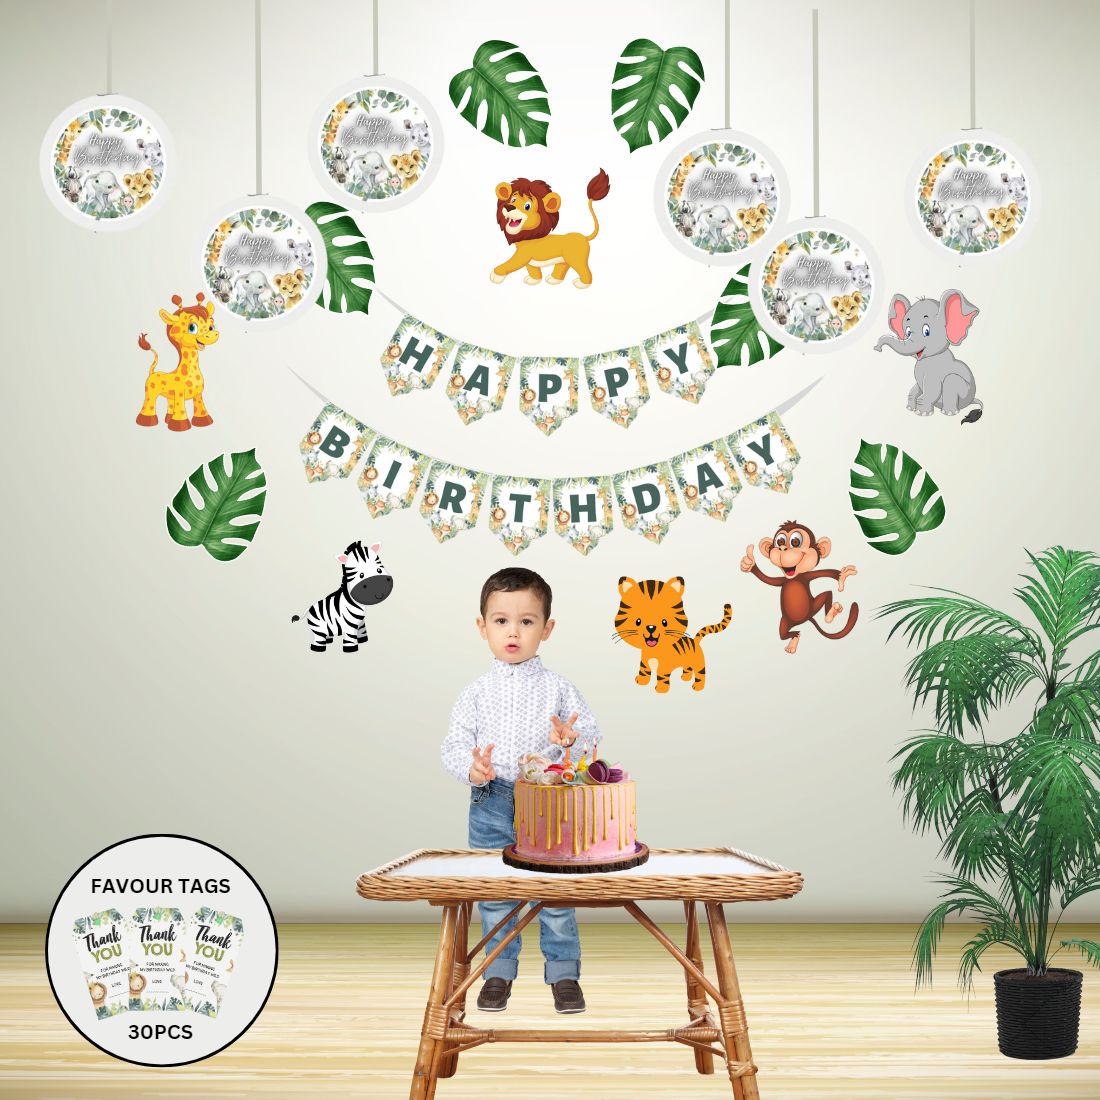 Jungle Theme Birthday Party Decorations - Banner, Cutouts, Favor Tags, Danglers (6 inches/250 GSM Cardstock/Mixcolour/61Pcs)